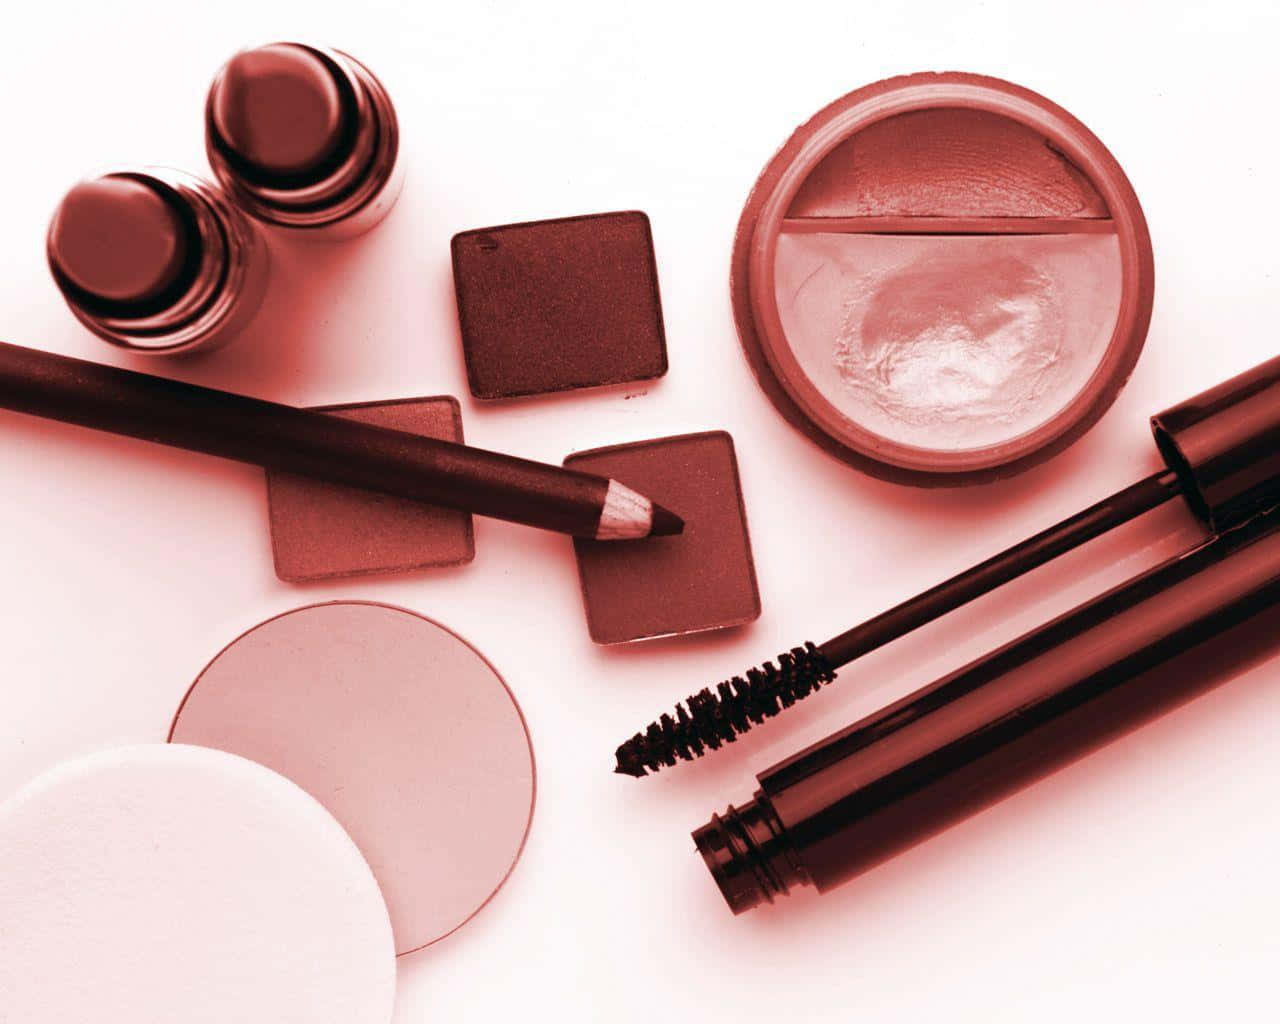 Pamper Yourself with Luxurious Cosmetics